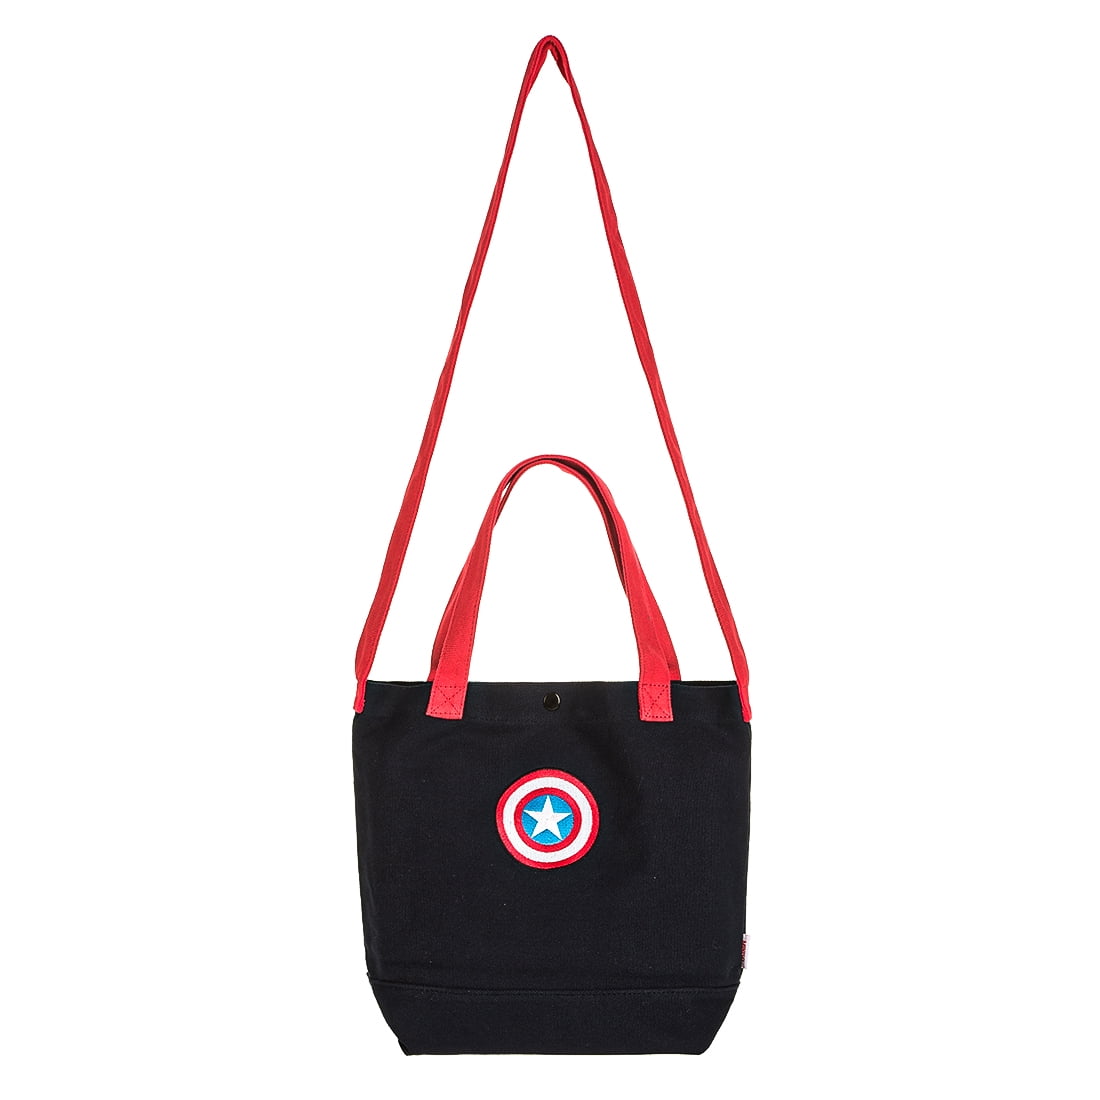 Miniso Marvel- Embroidered Shopping Bag,Black & Red, Size: One Size